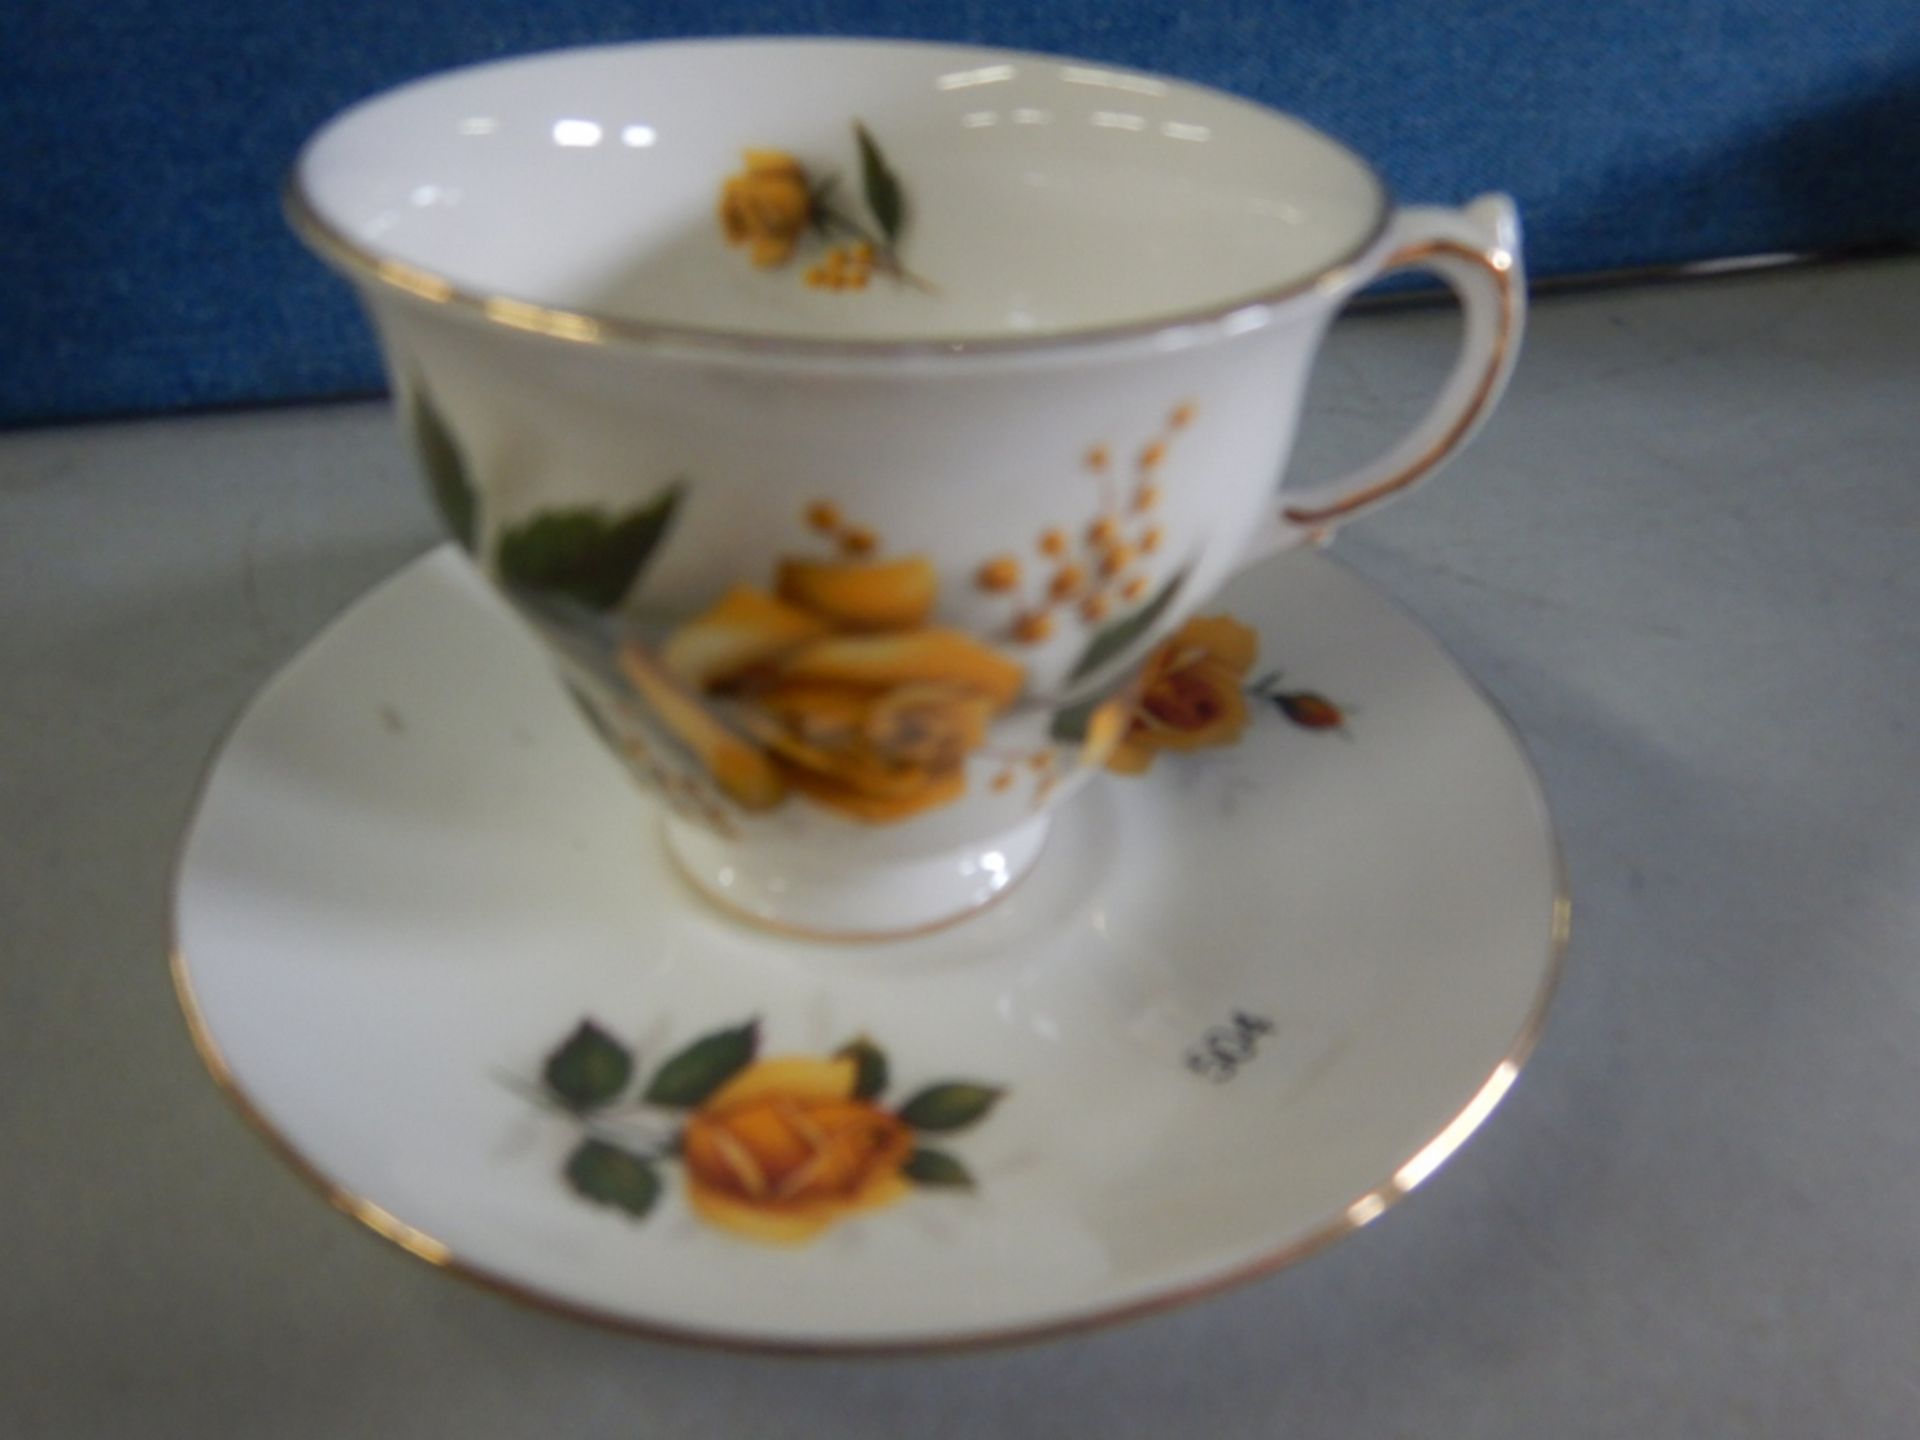 ANTIQUE TEACUPS & SAUCERS - MADE IN ENGLAND - LOT OF 7 - BONE CHINA #8273 - YELLOW FLOWERS, # - Image 19 of 33